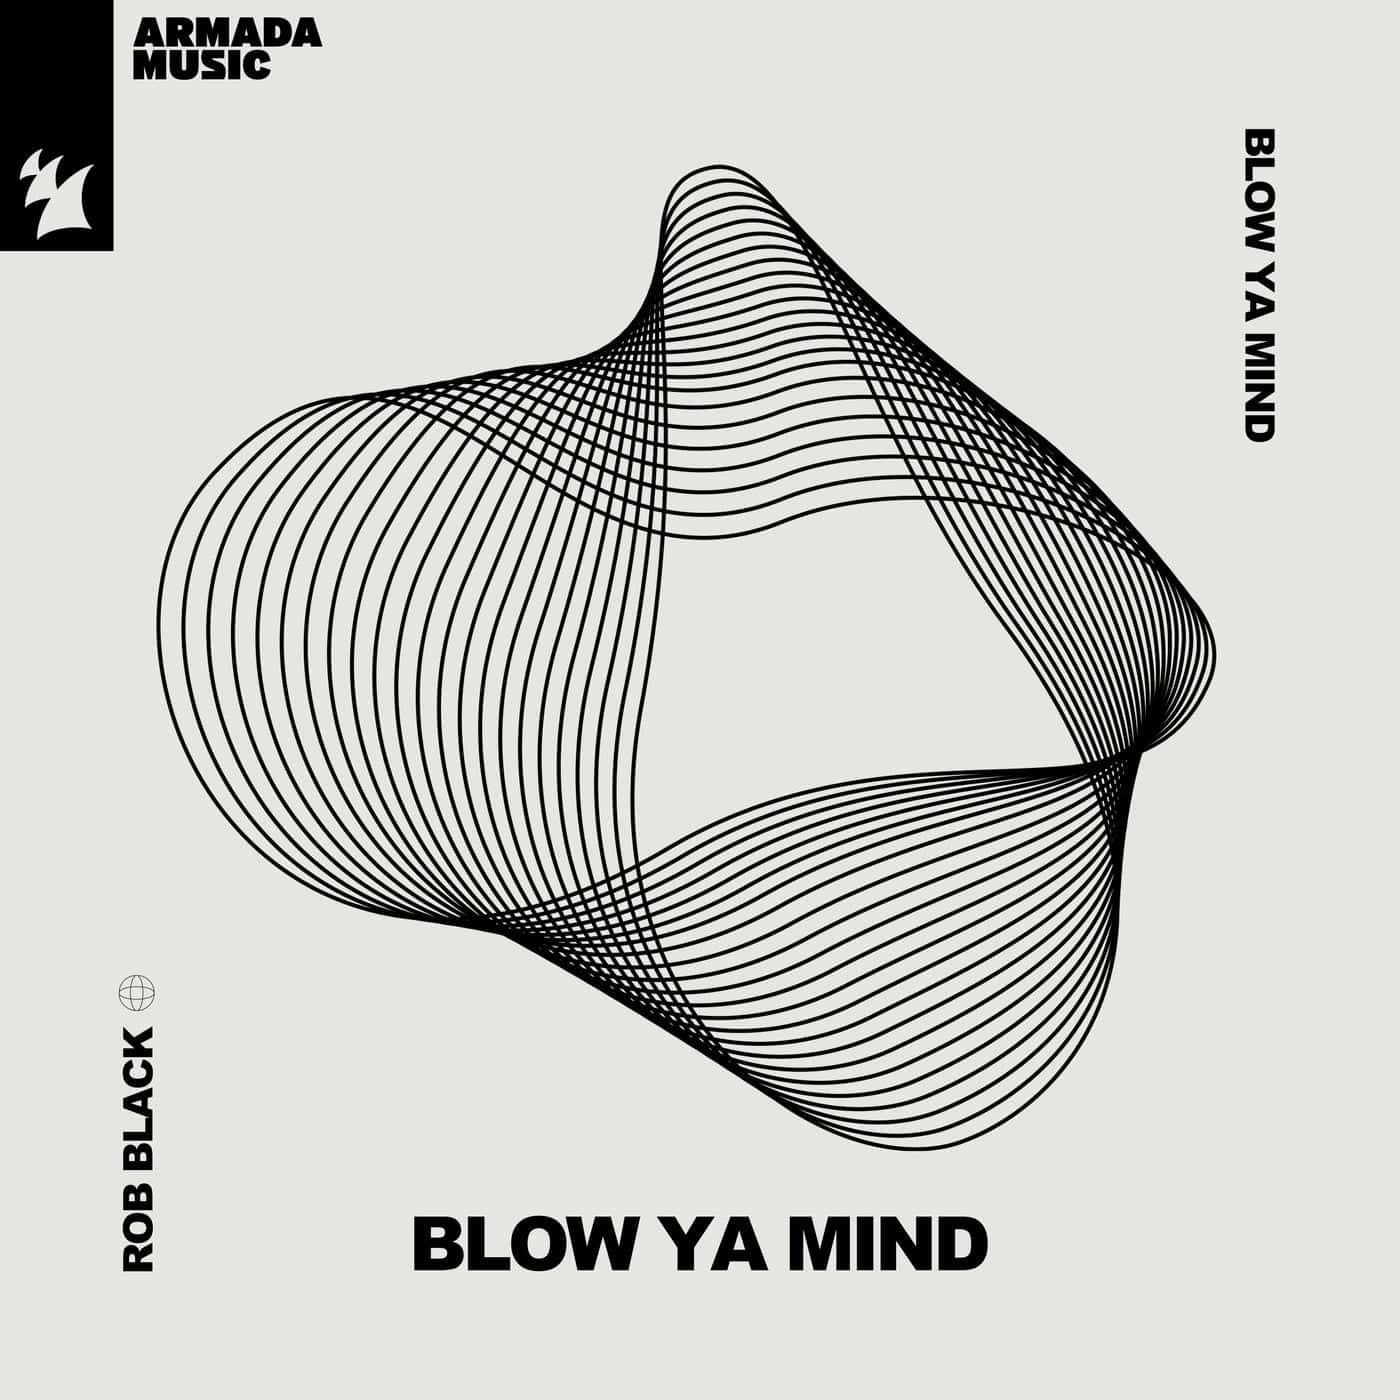 image cover: Blow Ya Mind by Rob Black on Armada Music